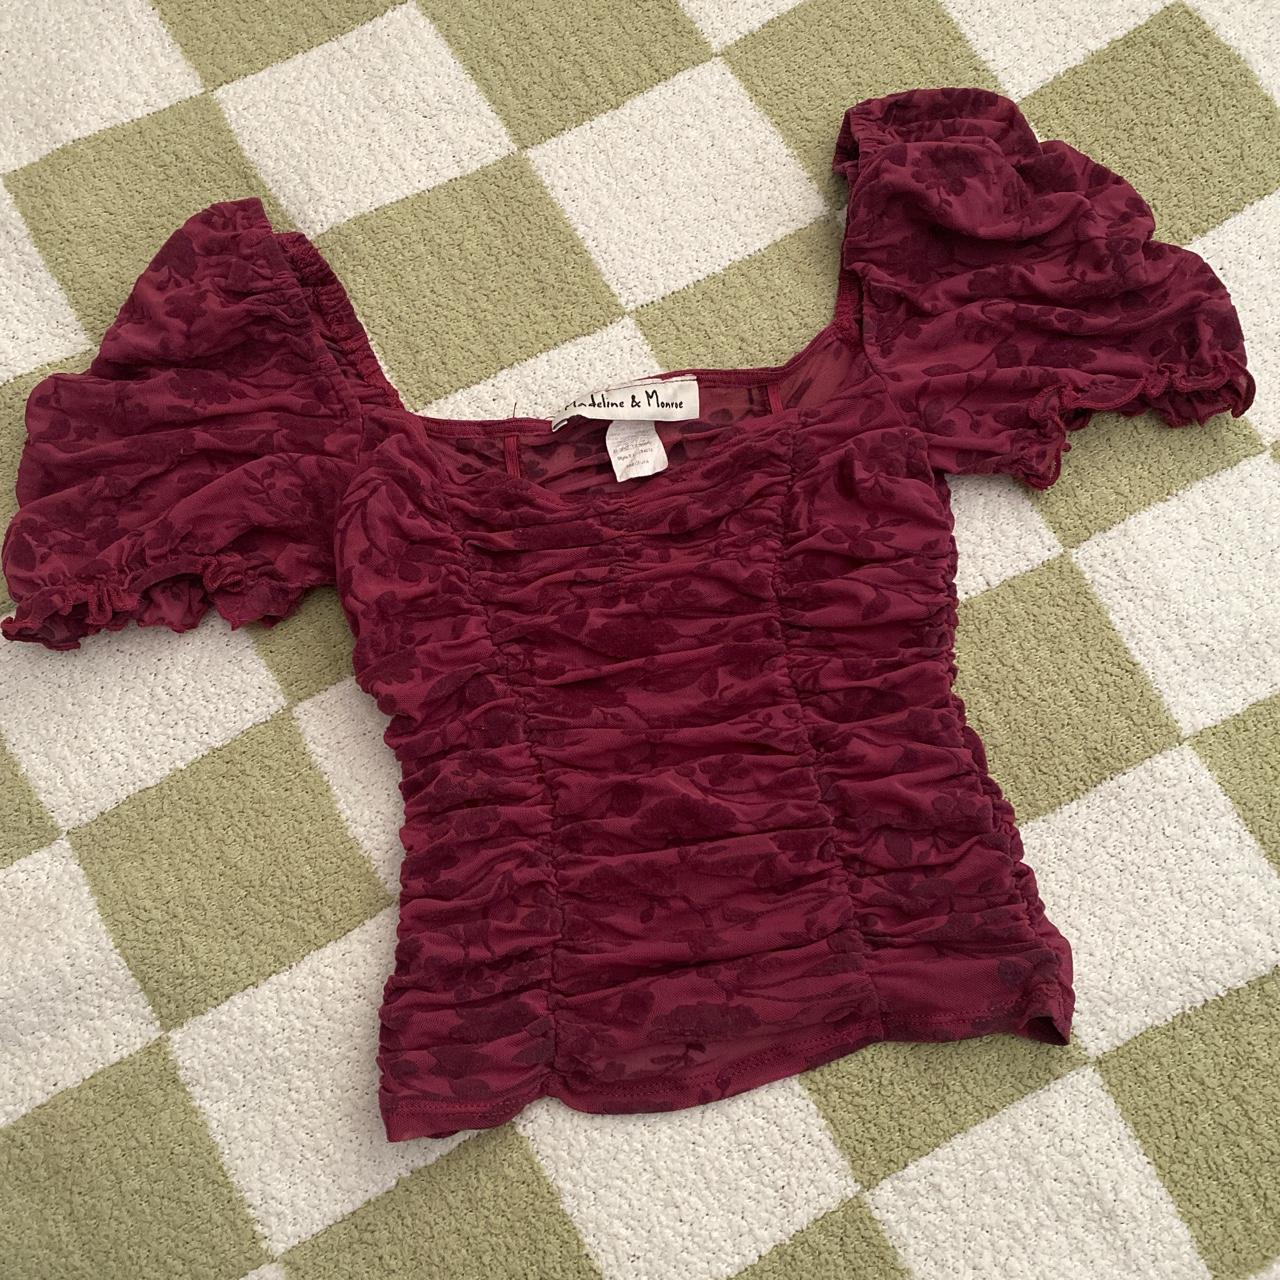 Maroon royal red coquette ruffle floral mesh... - Depop